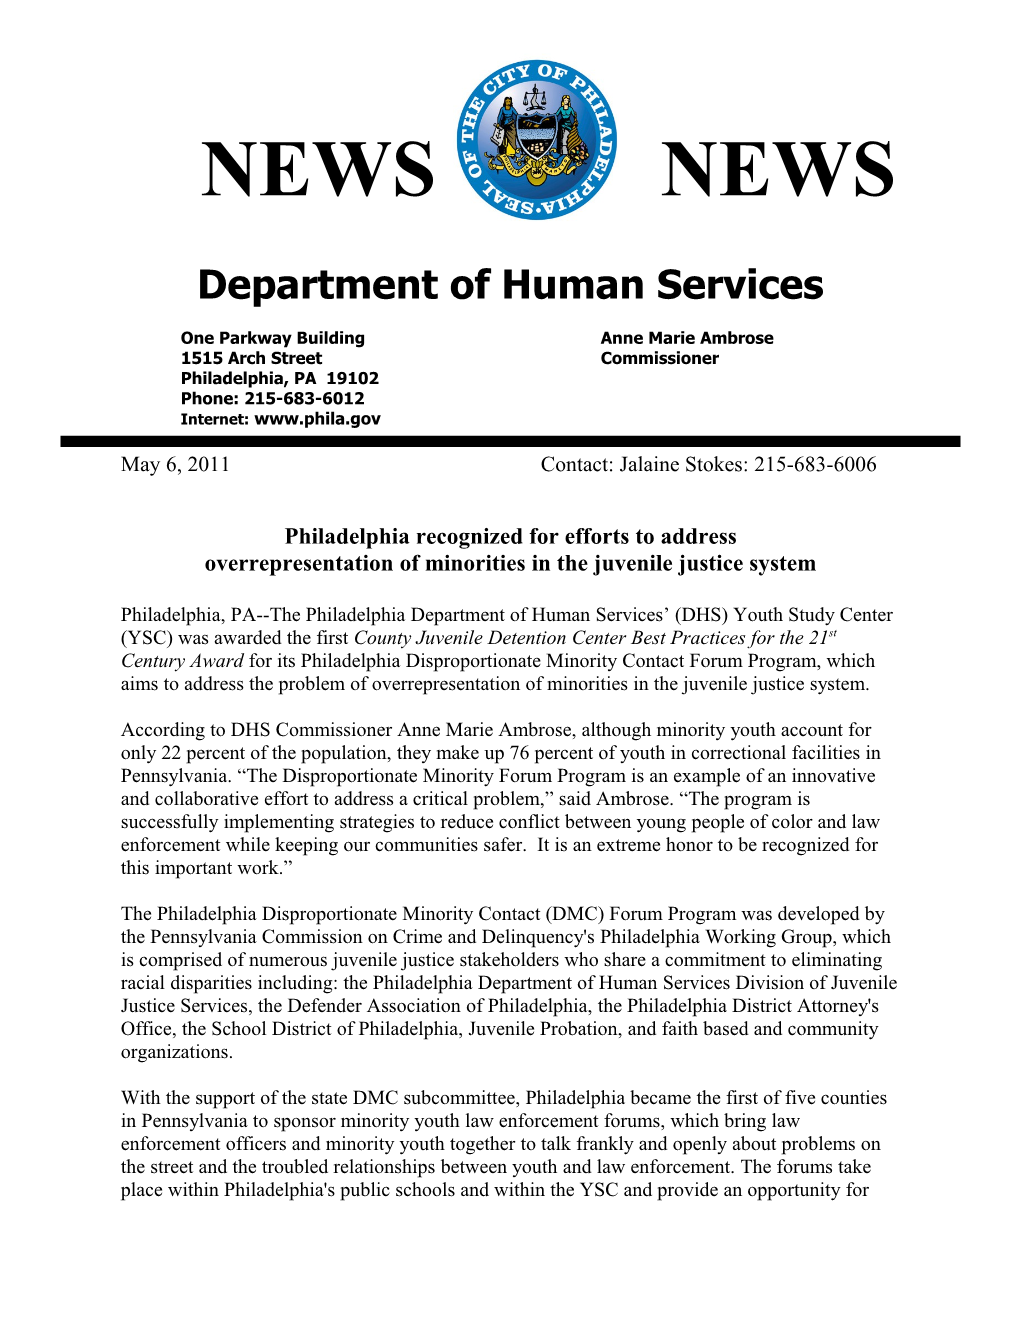 The Philadelphia Department of Human Services (DHS) Youth Study Center (YSC) Will Receive